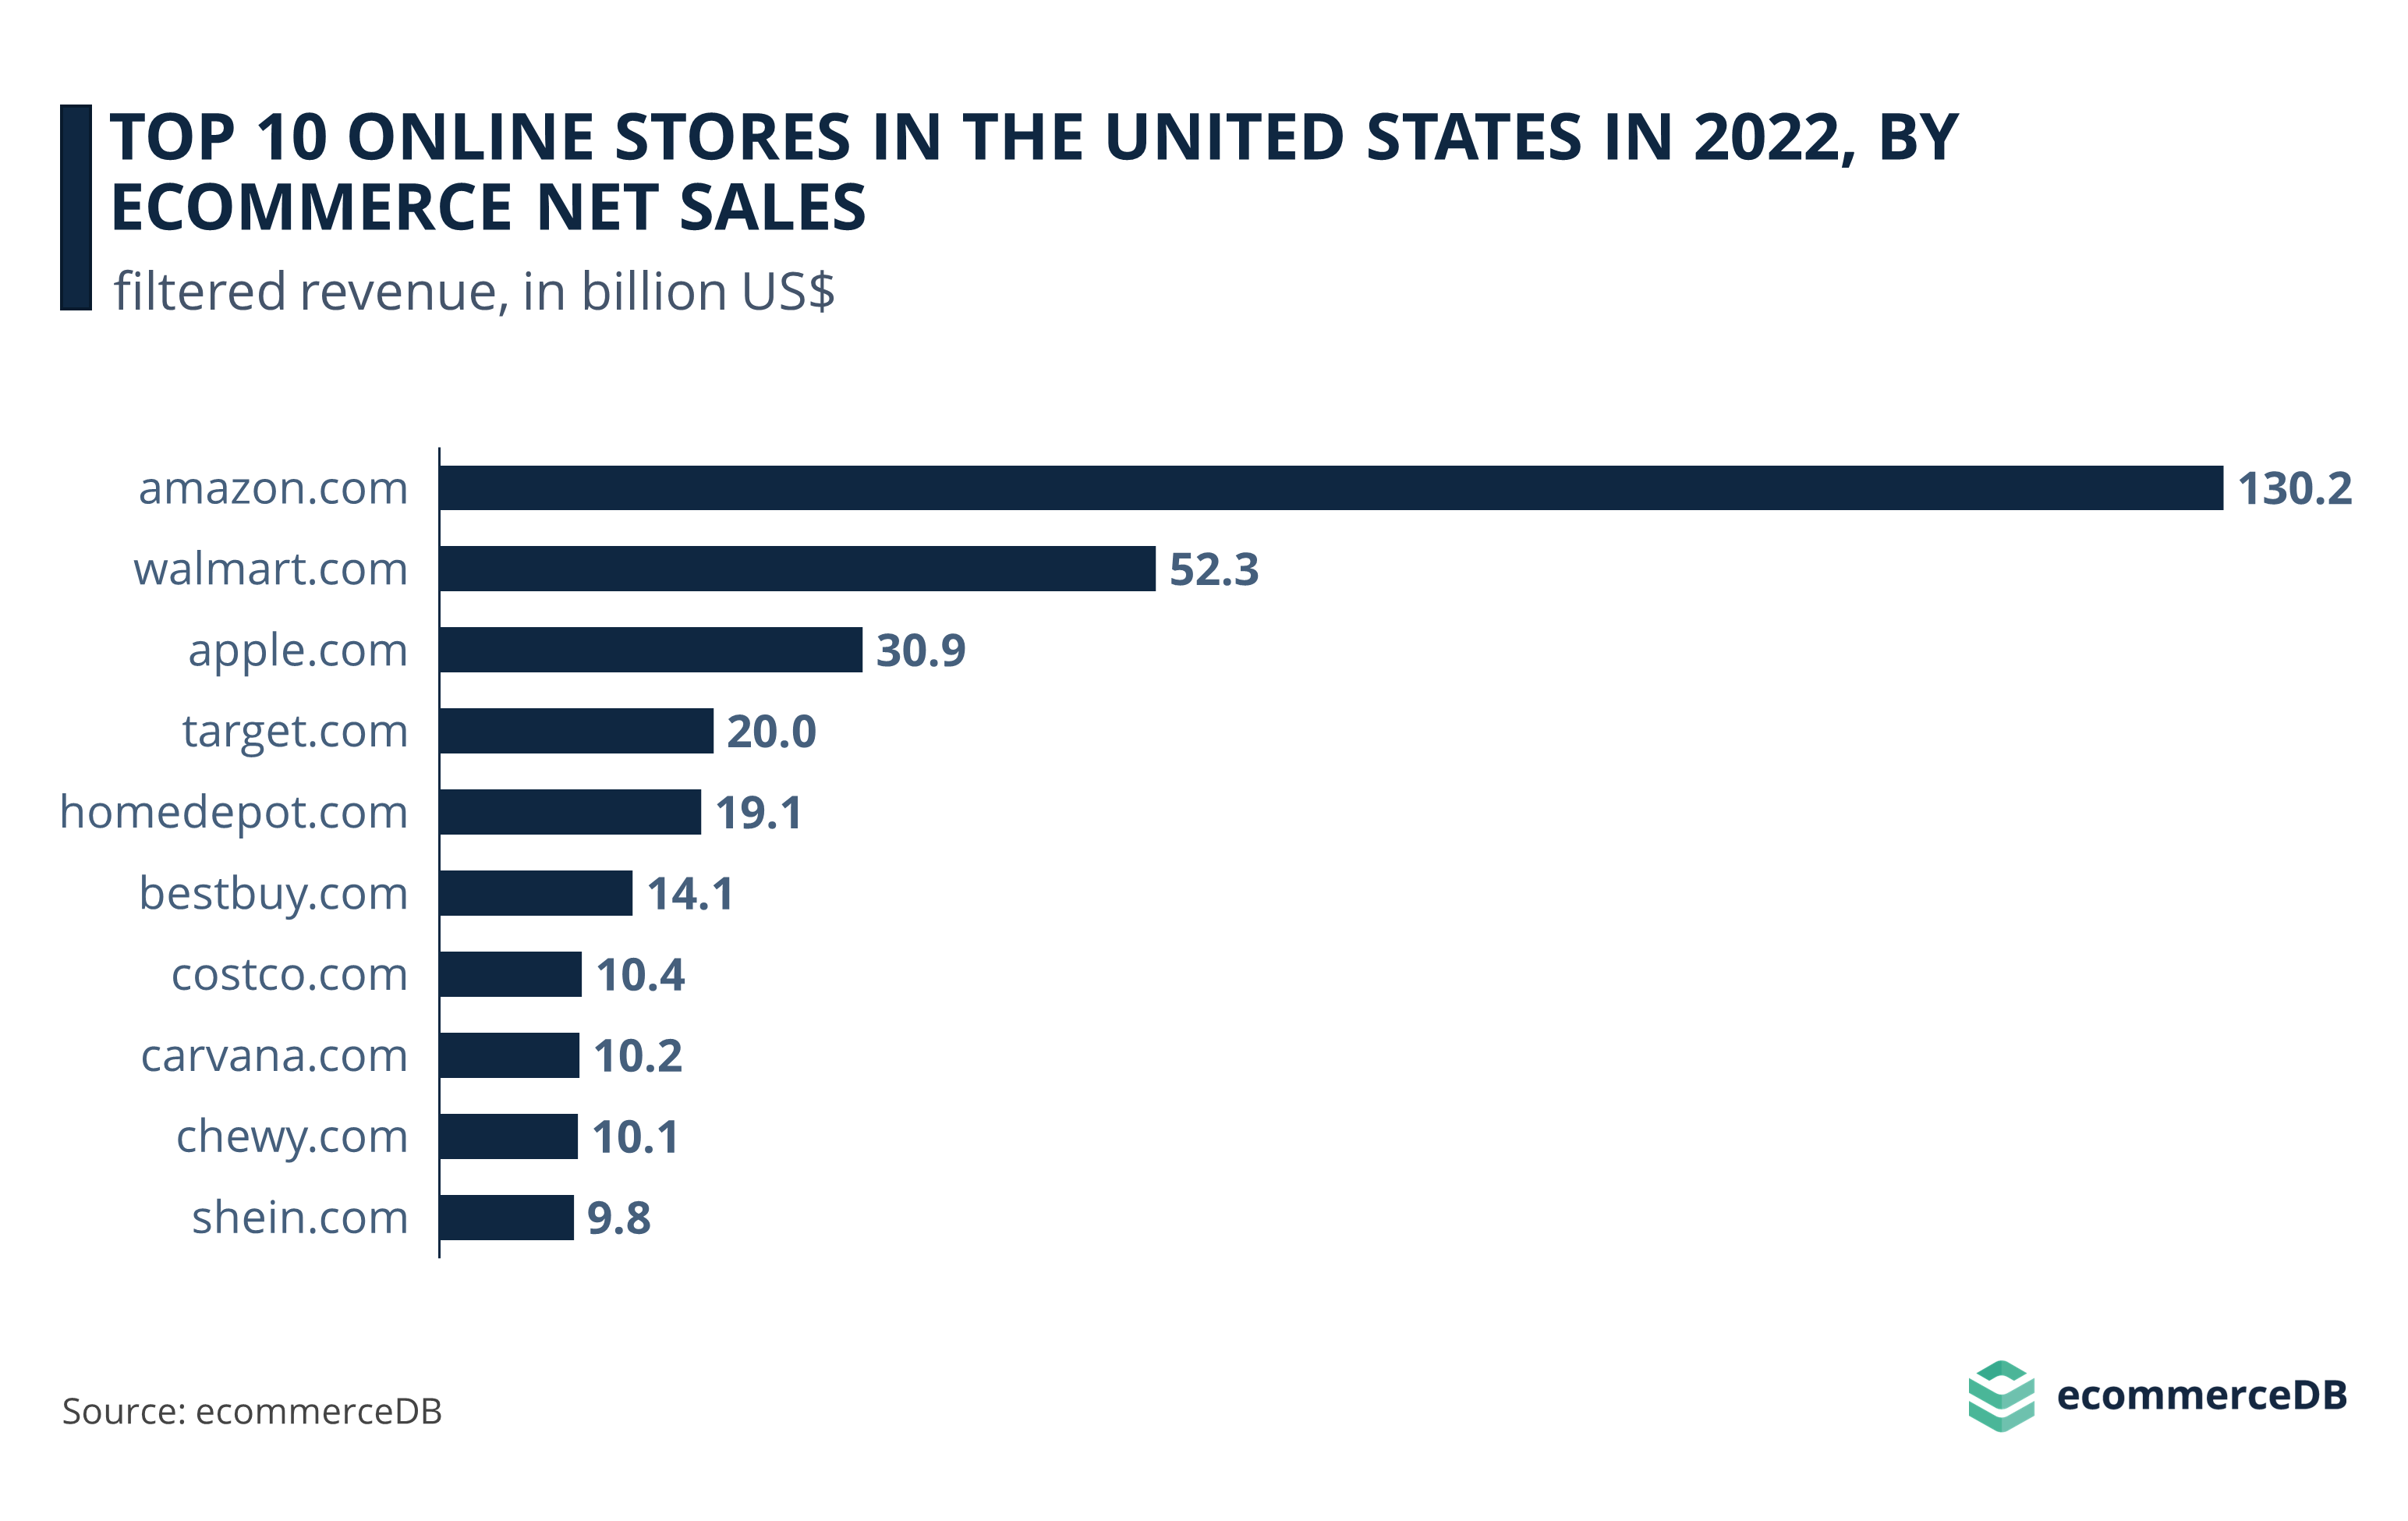 Top 10 Online Stores in the United States in 2022, by eCommerce Net Sales